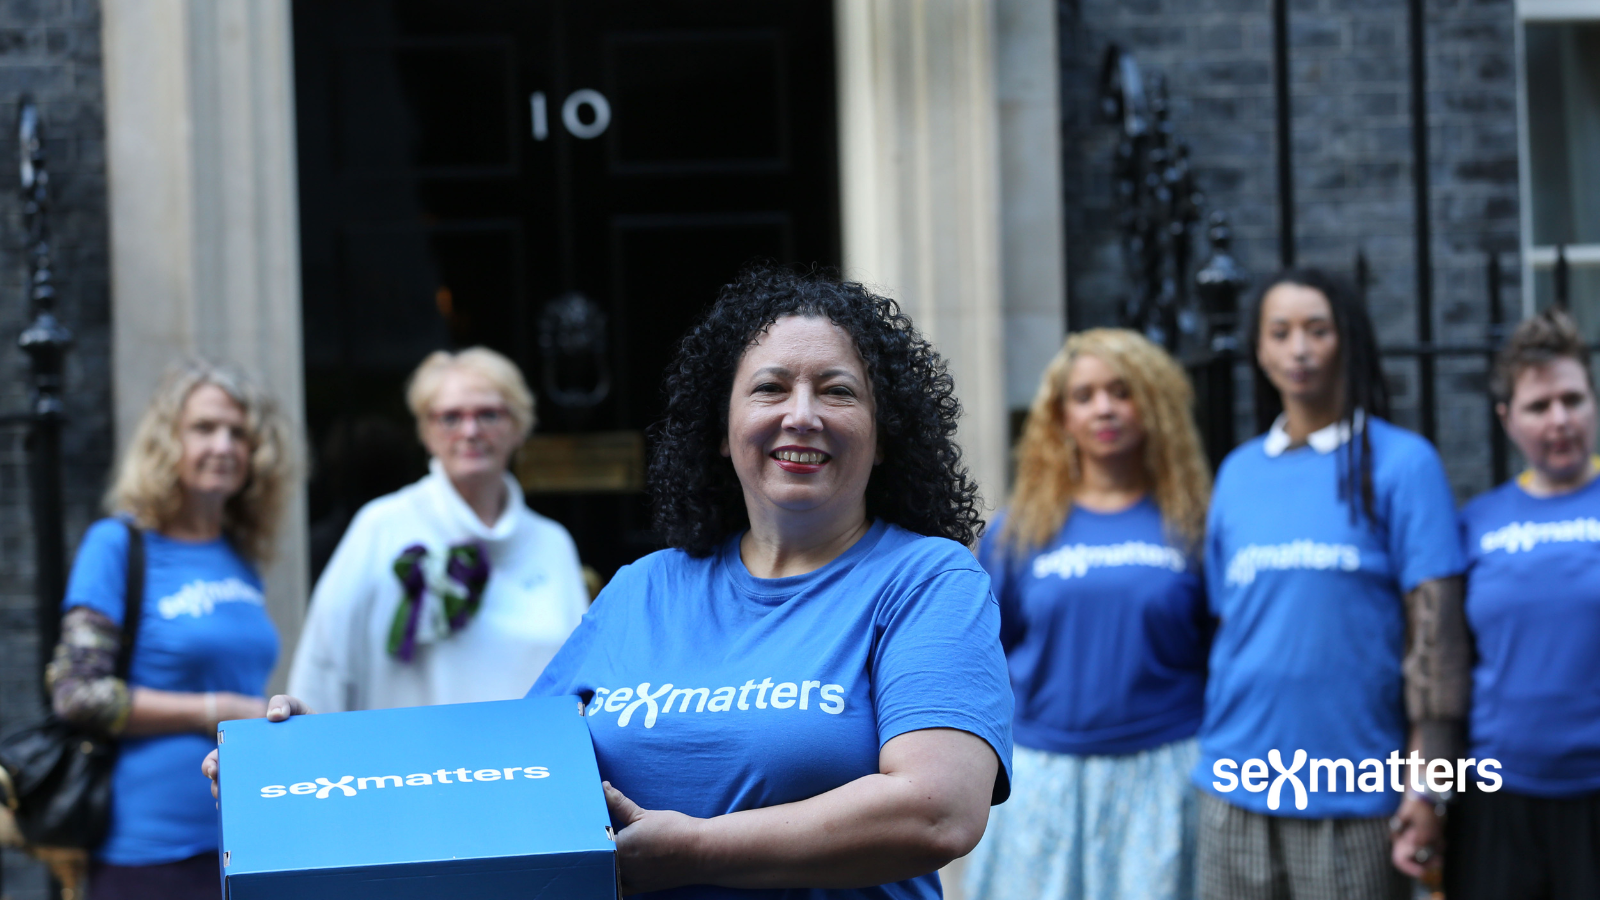 The Sex Matters team and supporters in front of 10 Downing Street